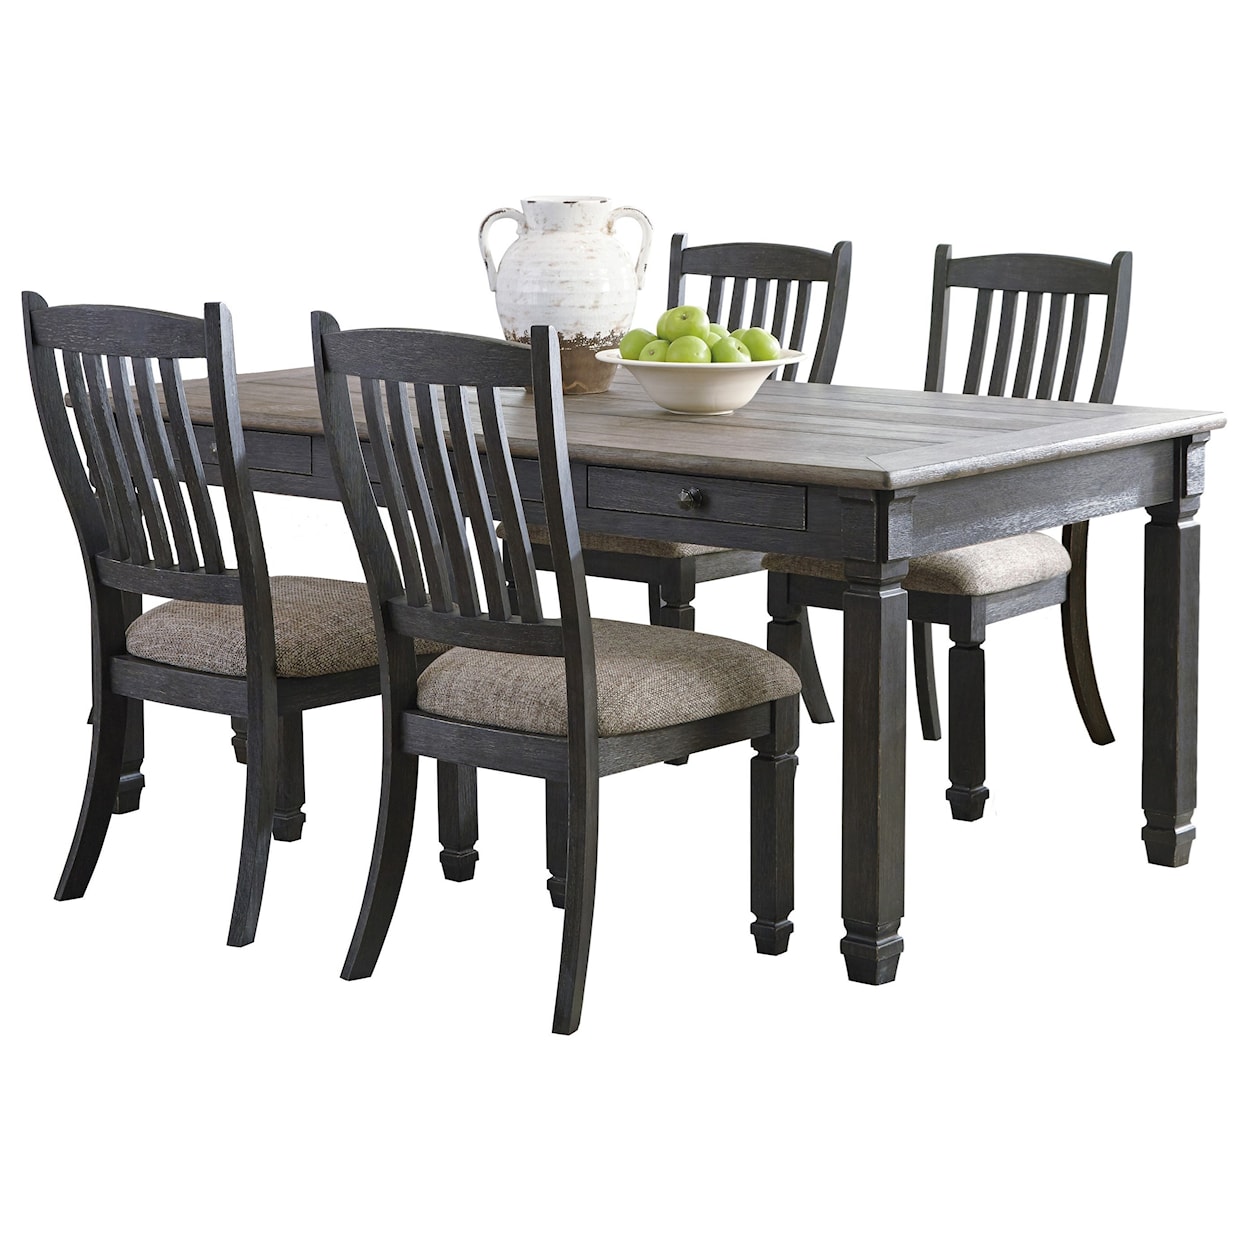 Ashley Signature Design Tyler Creek 5-Piece Table and Chair Set